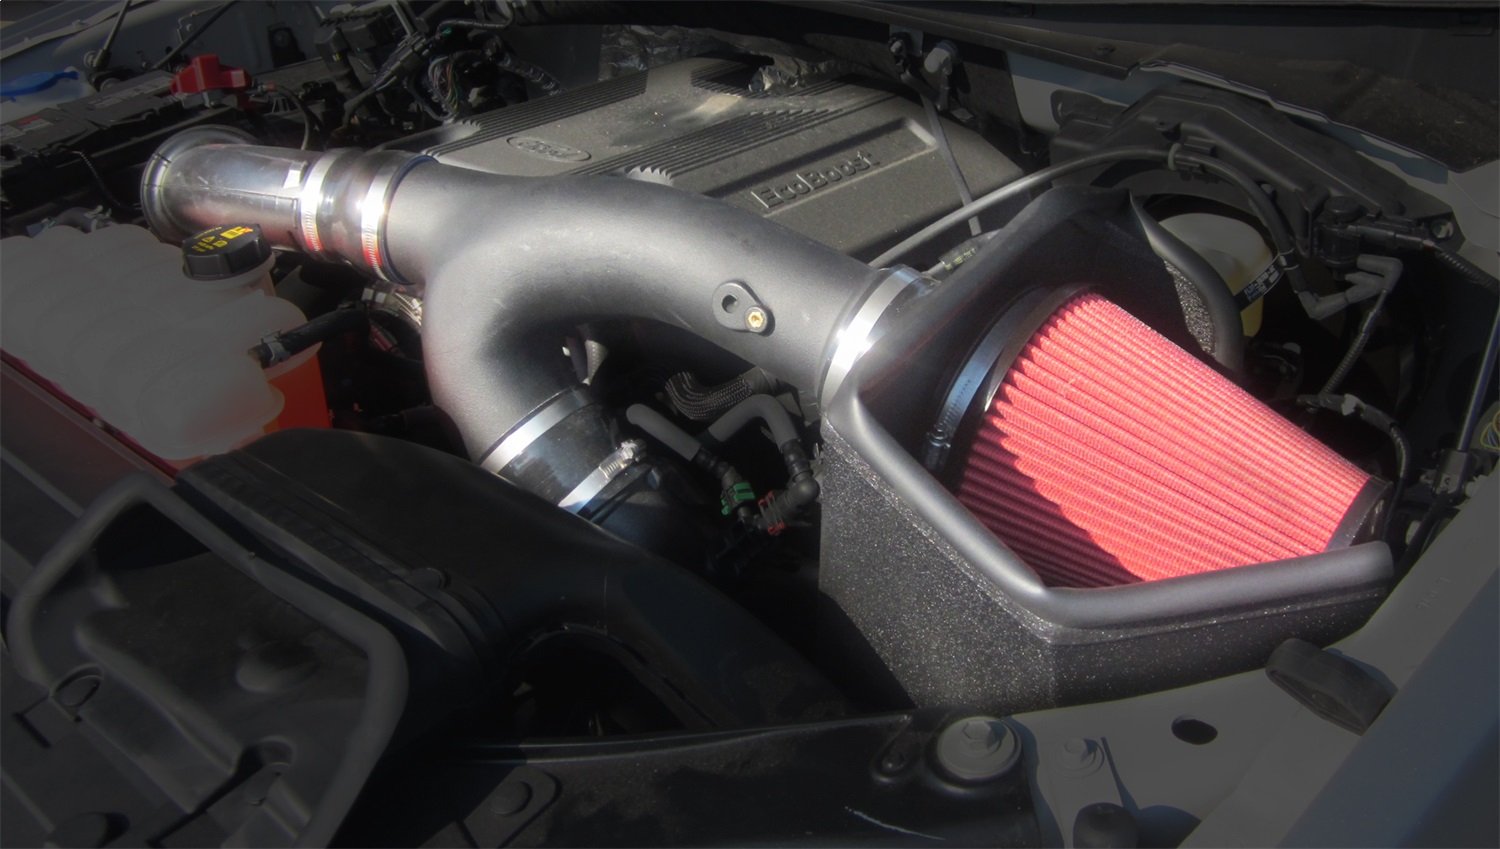 2017-2019 Corsa Raptor Shielded Box Air Intake with red filter